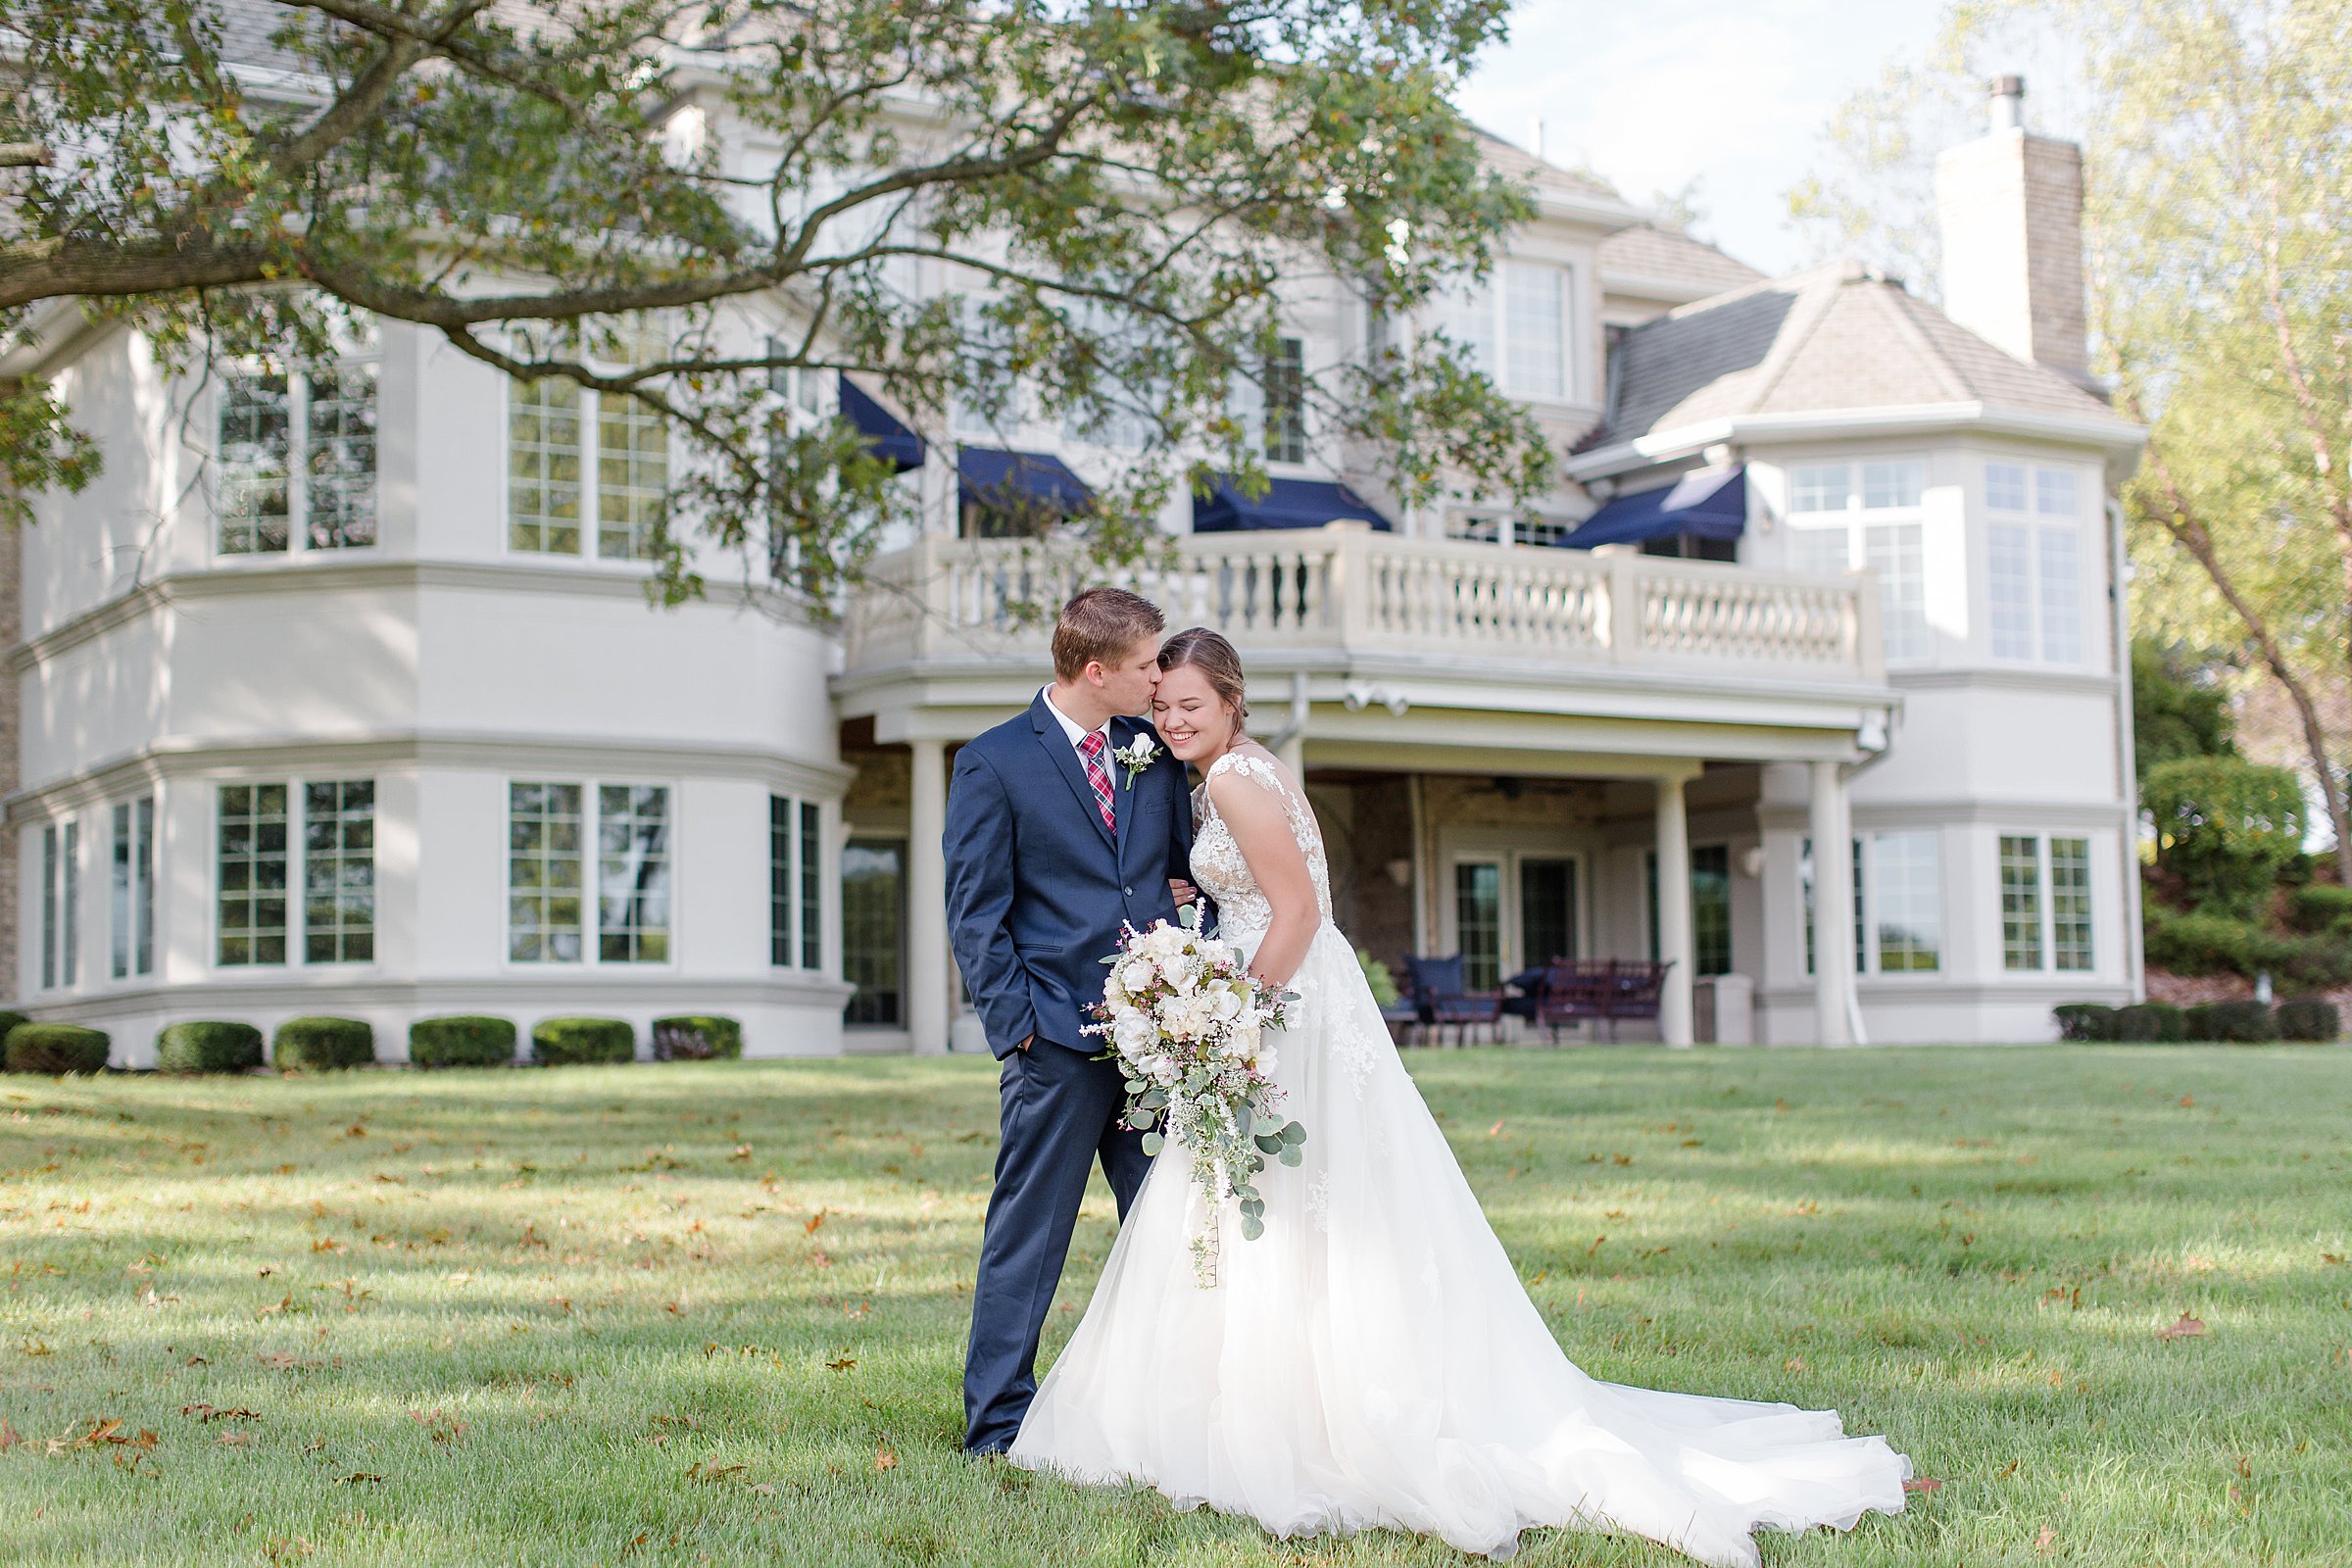 Indiana bride and groom posing in front of wedding venue